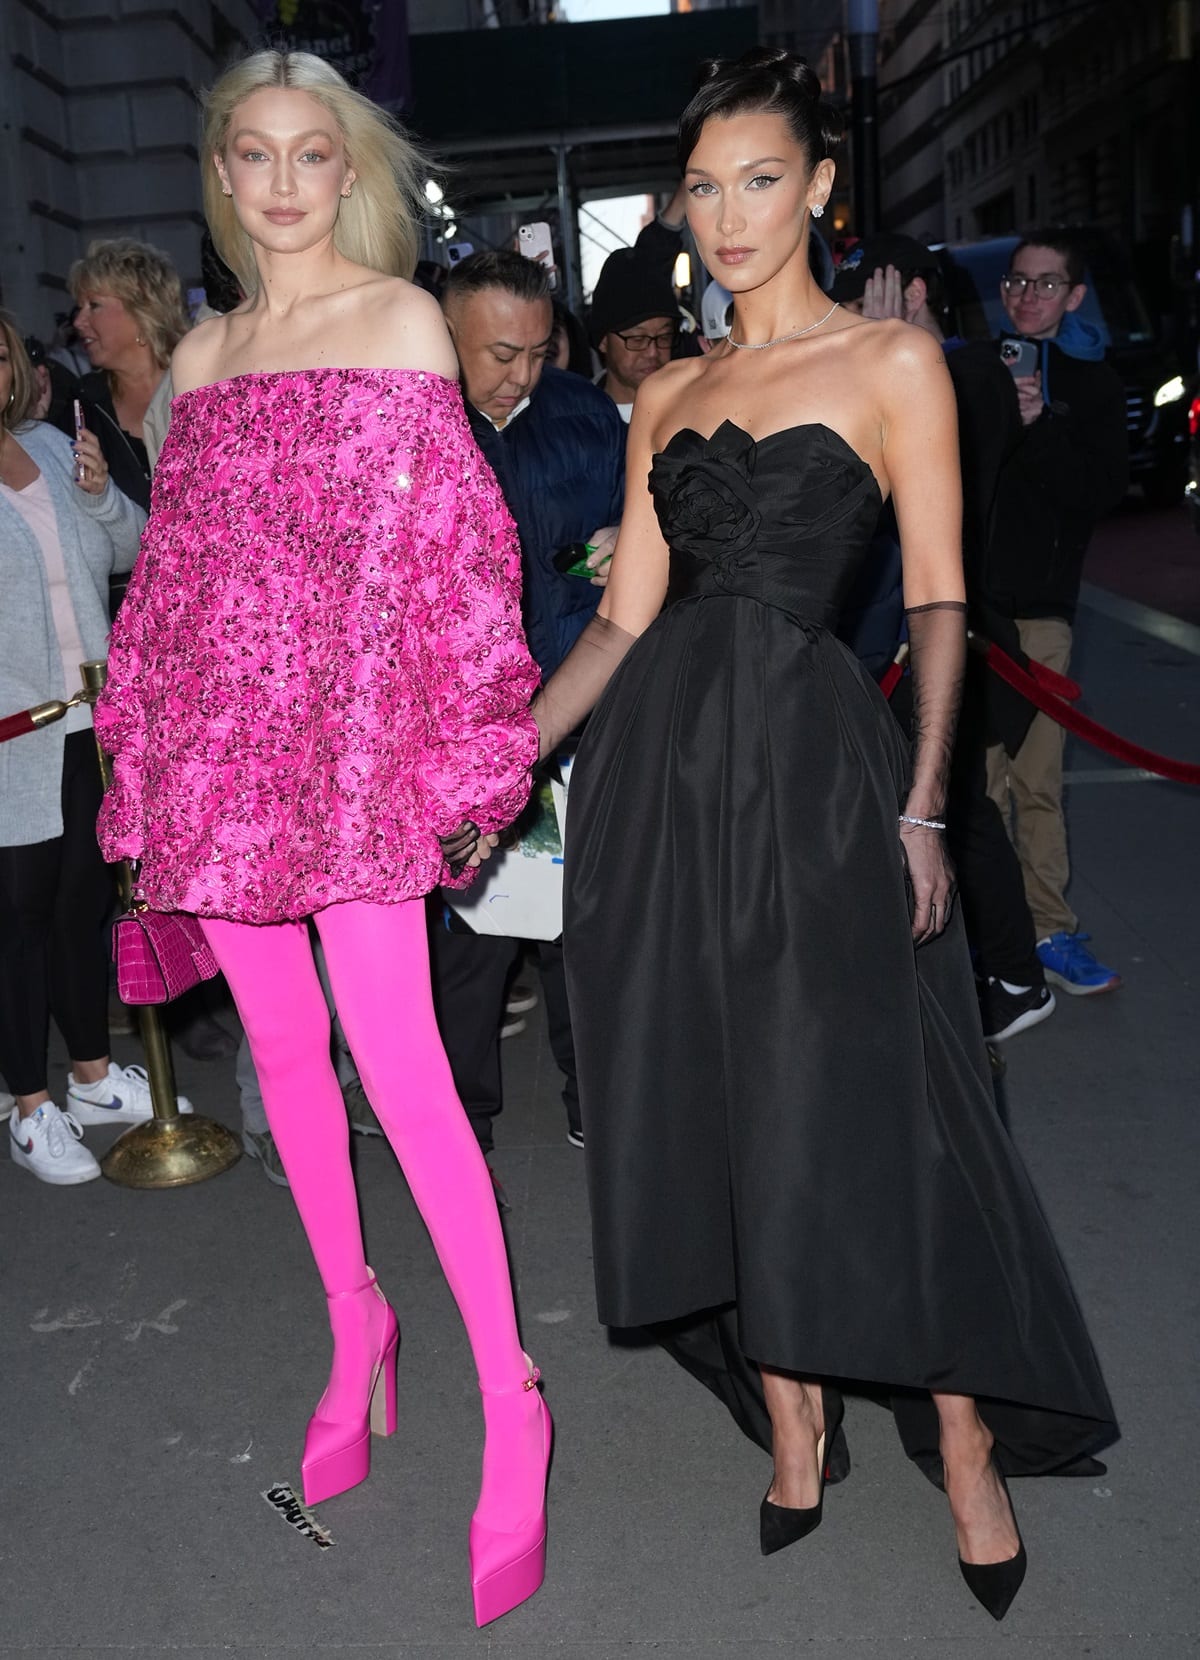 At the 2022 Prince's Trust Gala held at Cipriani 25 Broadway in New York on April 28, Gigi Hadid, with her height of 5ft 9 ¼ inches (175.9 cm), was notably taller than her sister Bella Hadid, who stands at 5ft 8 inches (172.7 cm)